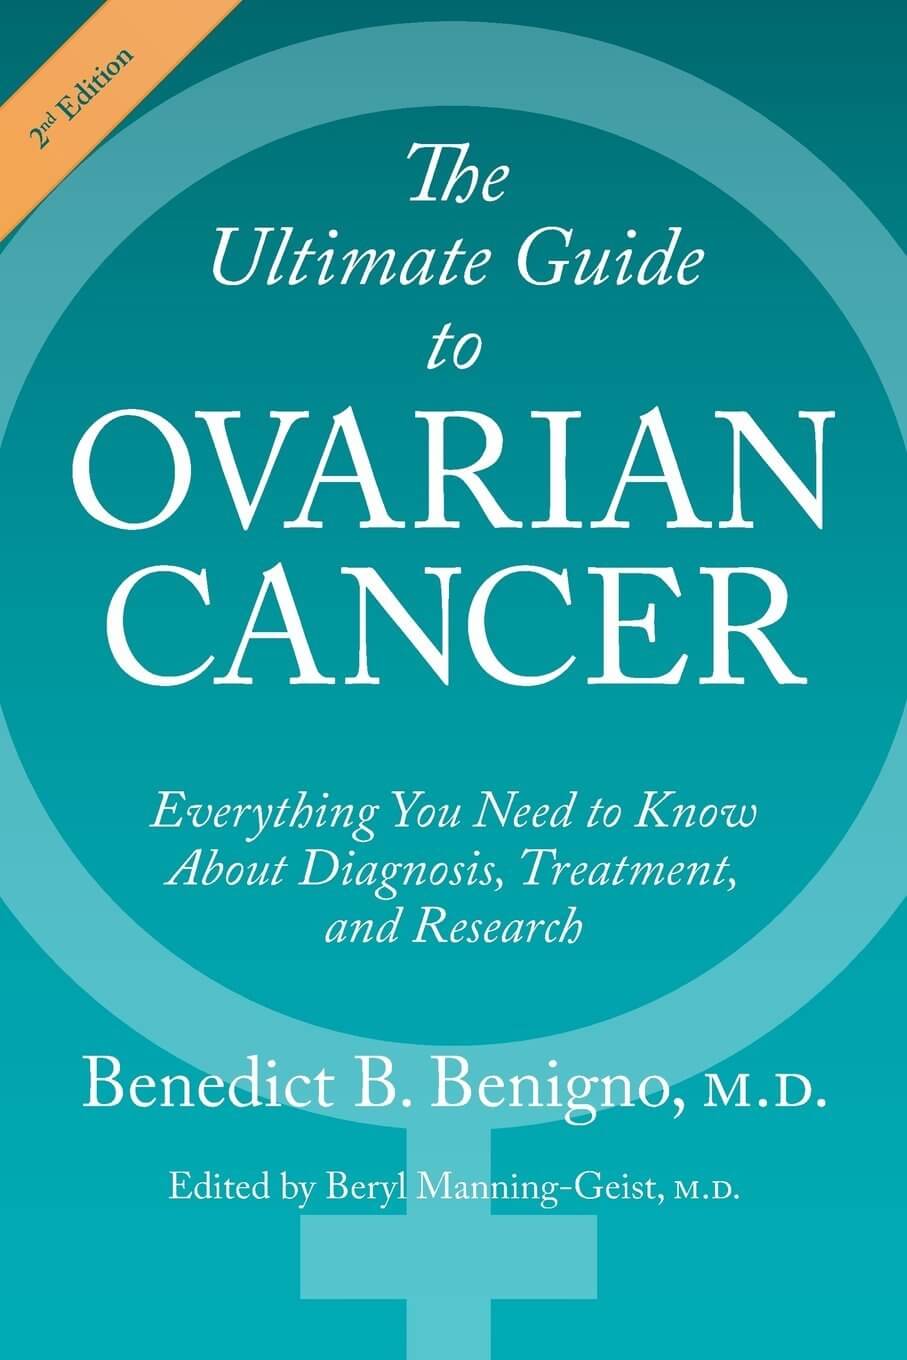 ovarian cancer book cover